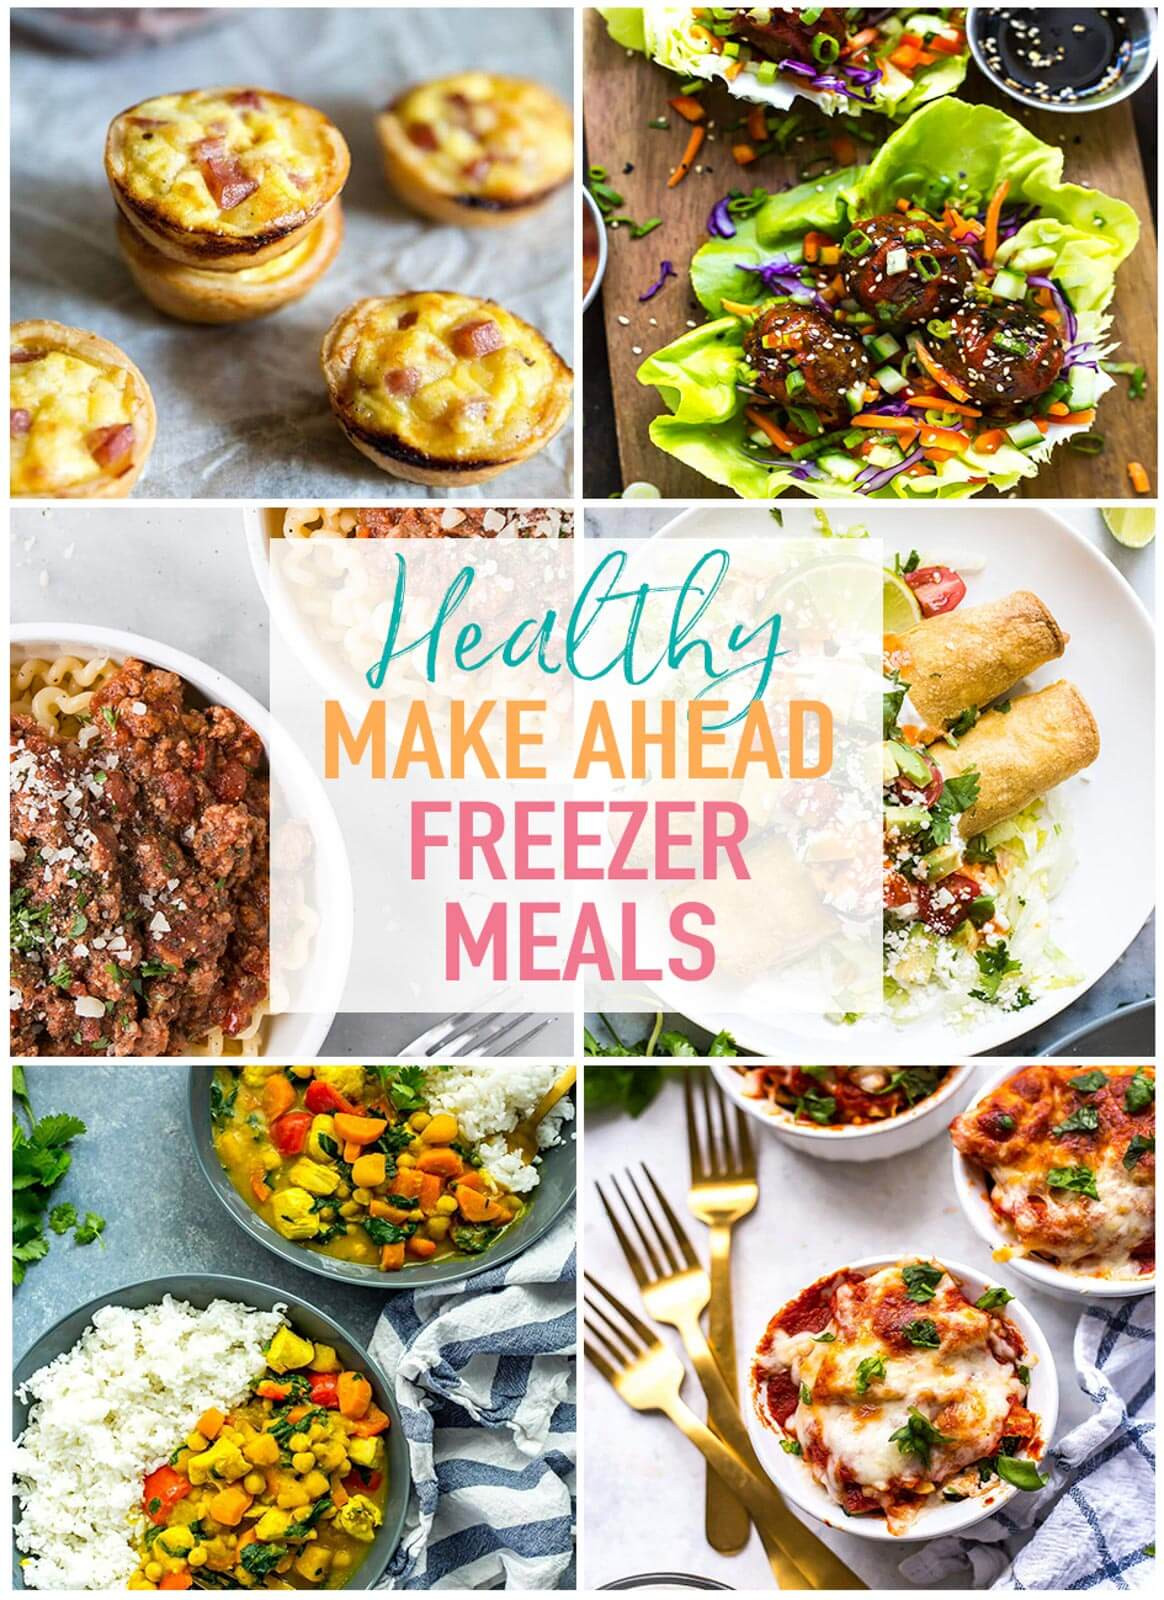 Healthy Dinners To Make
 21 Healthy Make Ahead Freezer Meals for Busy Weeknights